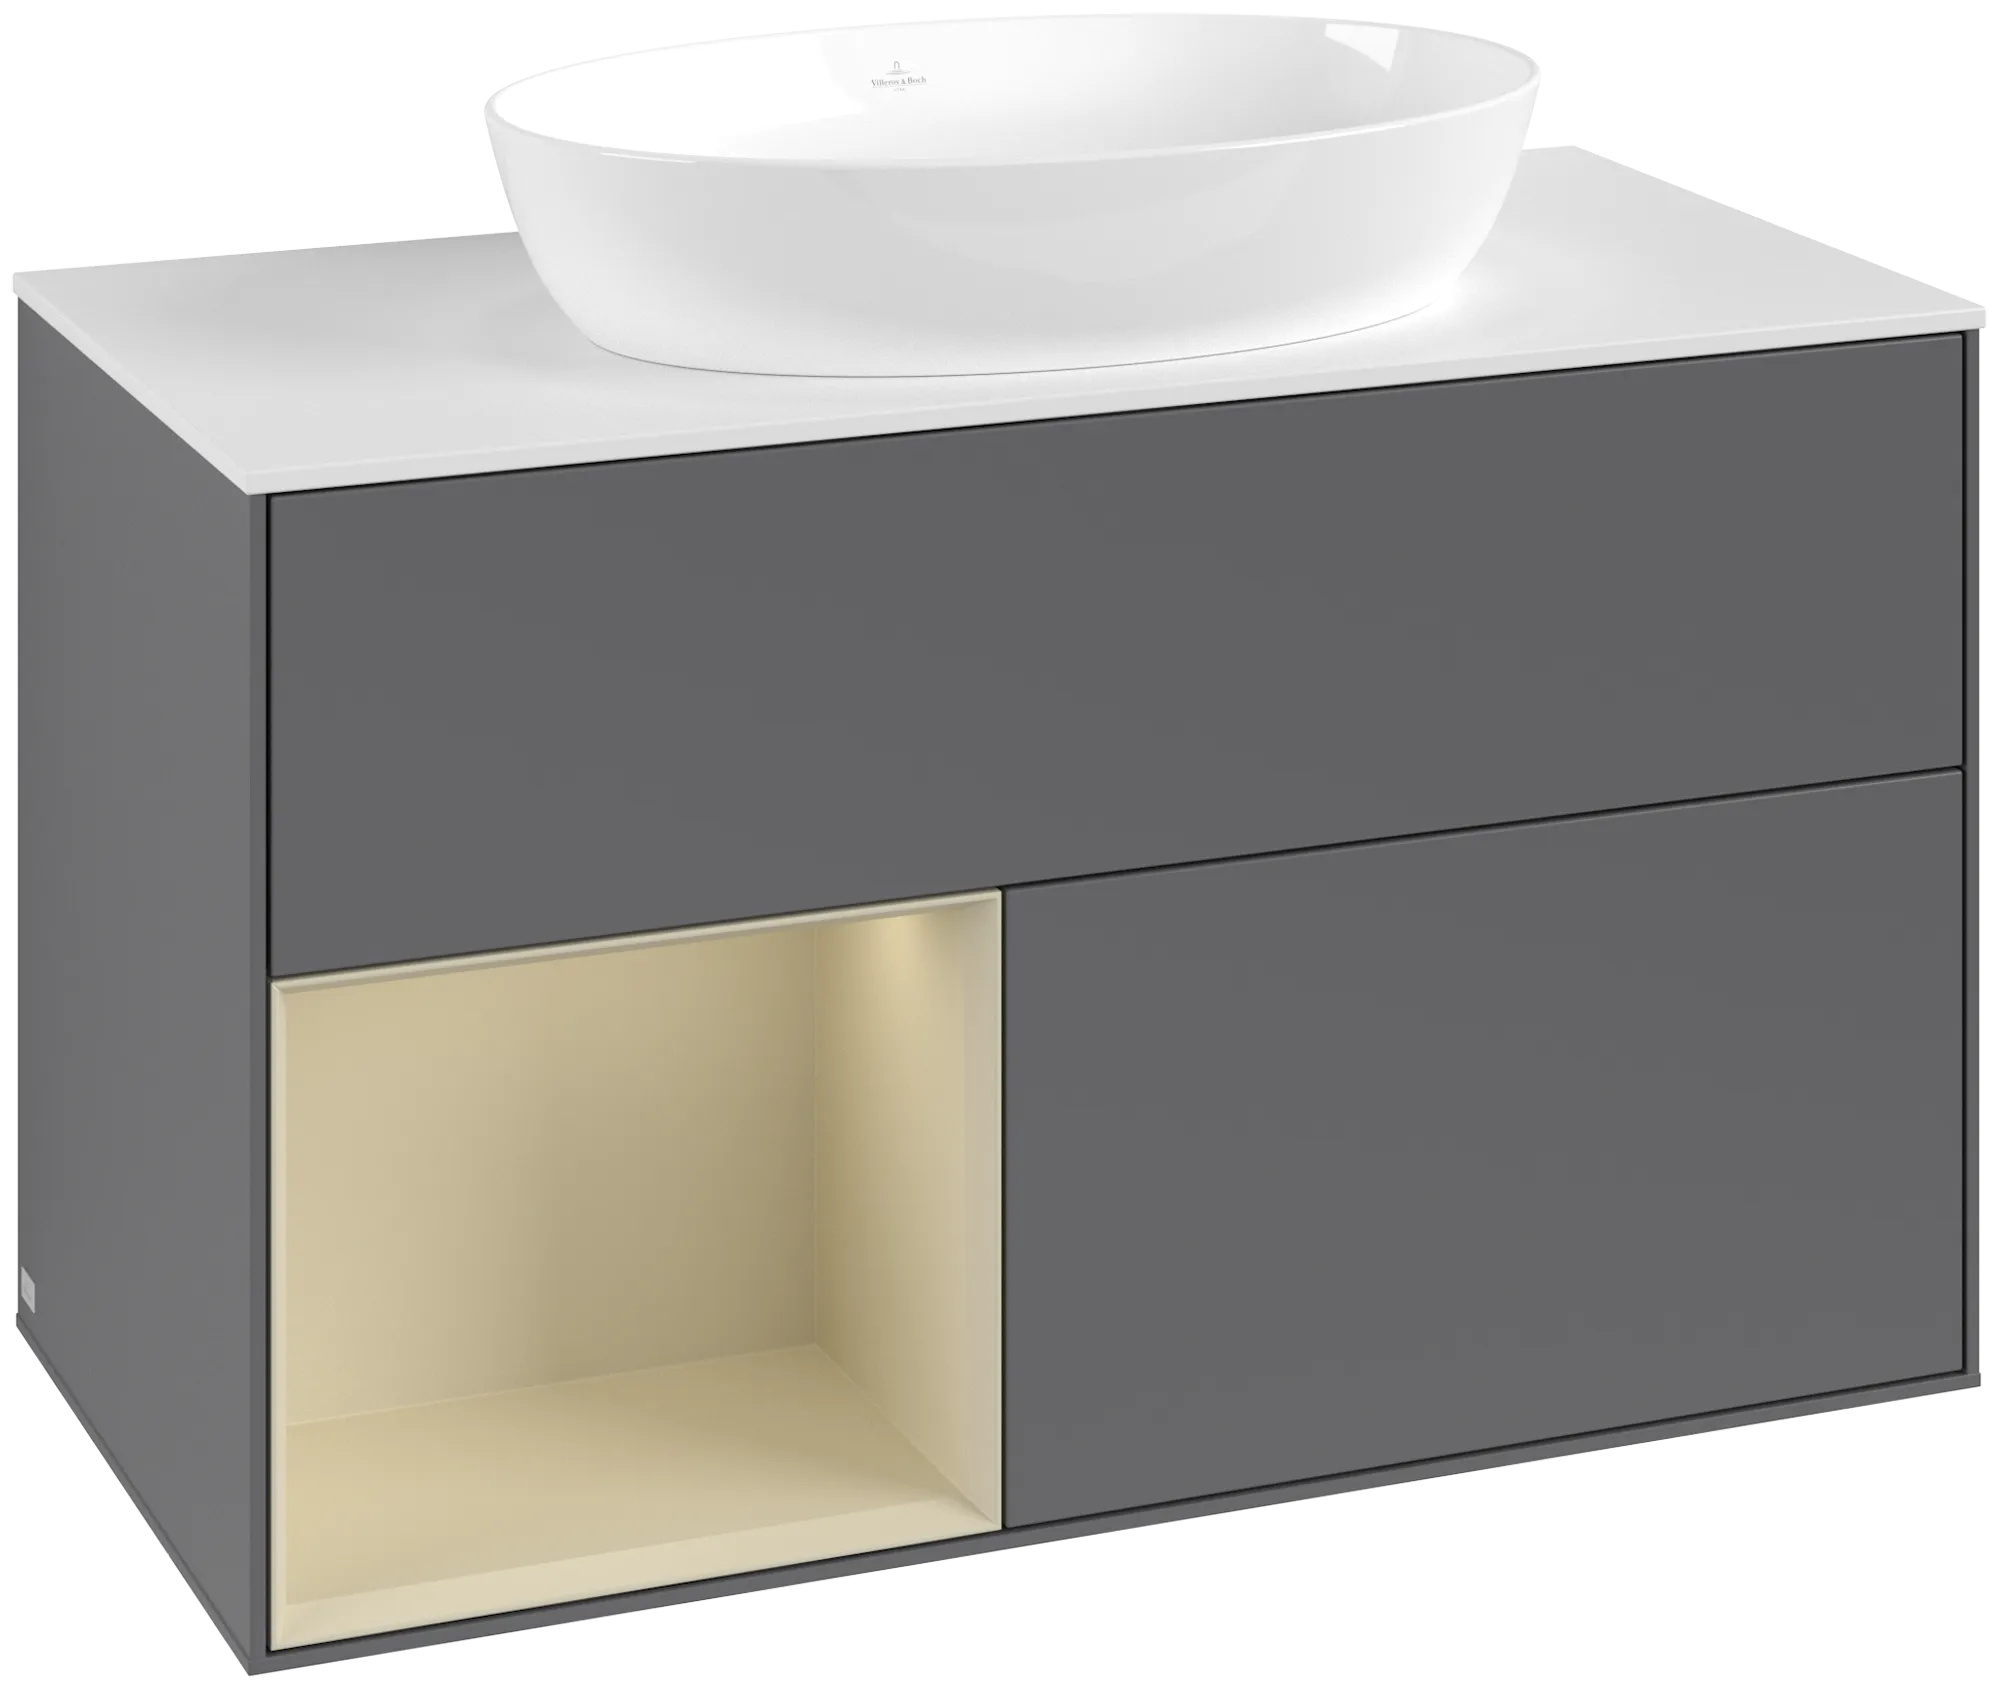 Picture of VILLEROY BOCH Finion Vanity unit, with lighting, 2 pull-out compartments, 1000 x 603 x 501 mm, Anthracite Matt Lacquer / Silk Grey Matt Lacquer / Glass White Matt #GA11HJGK